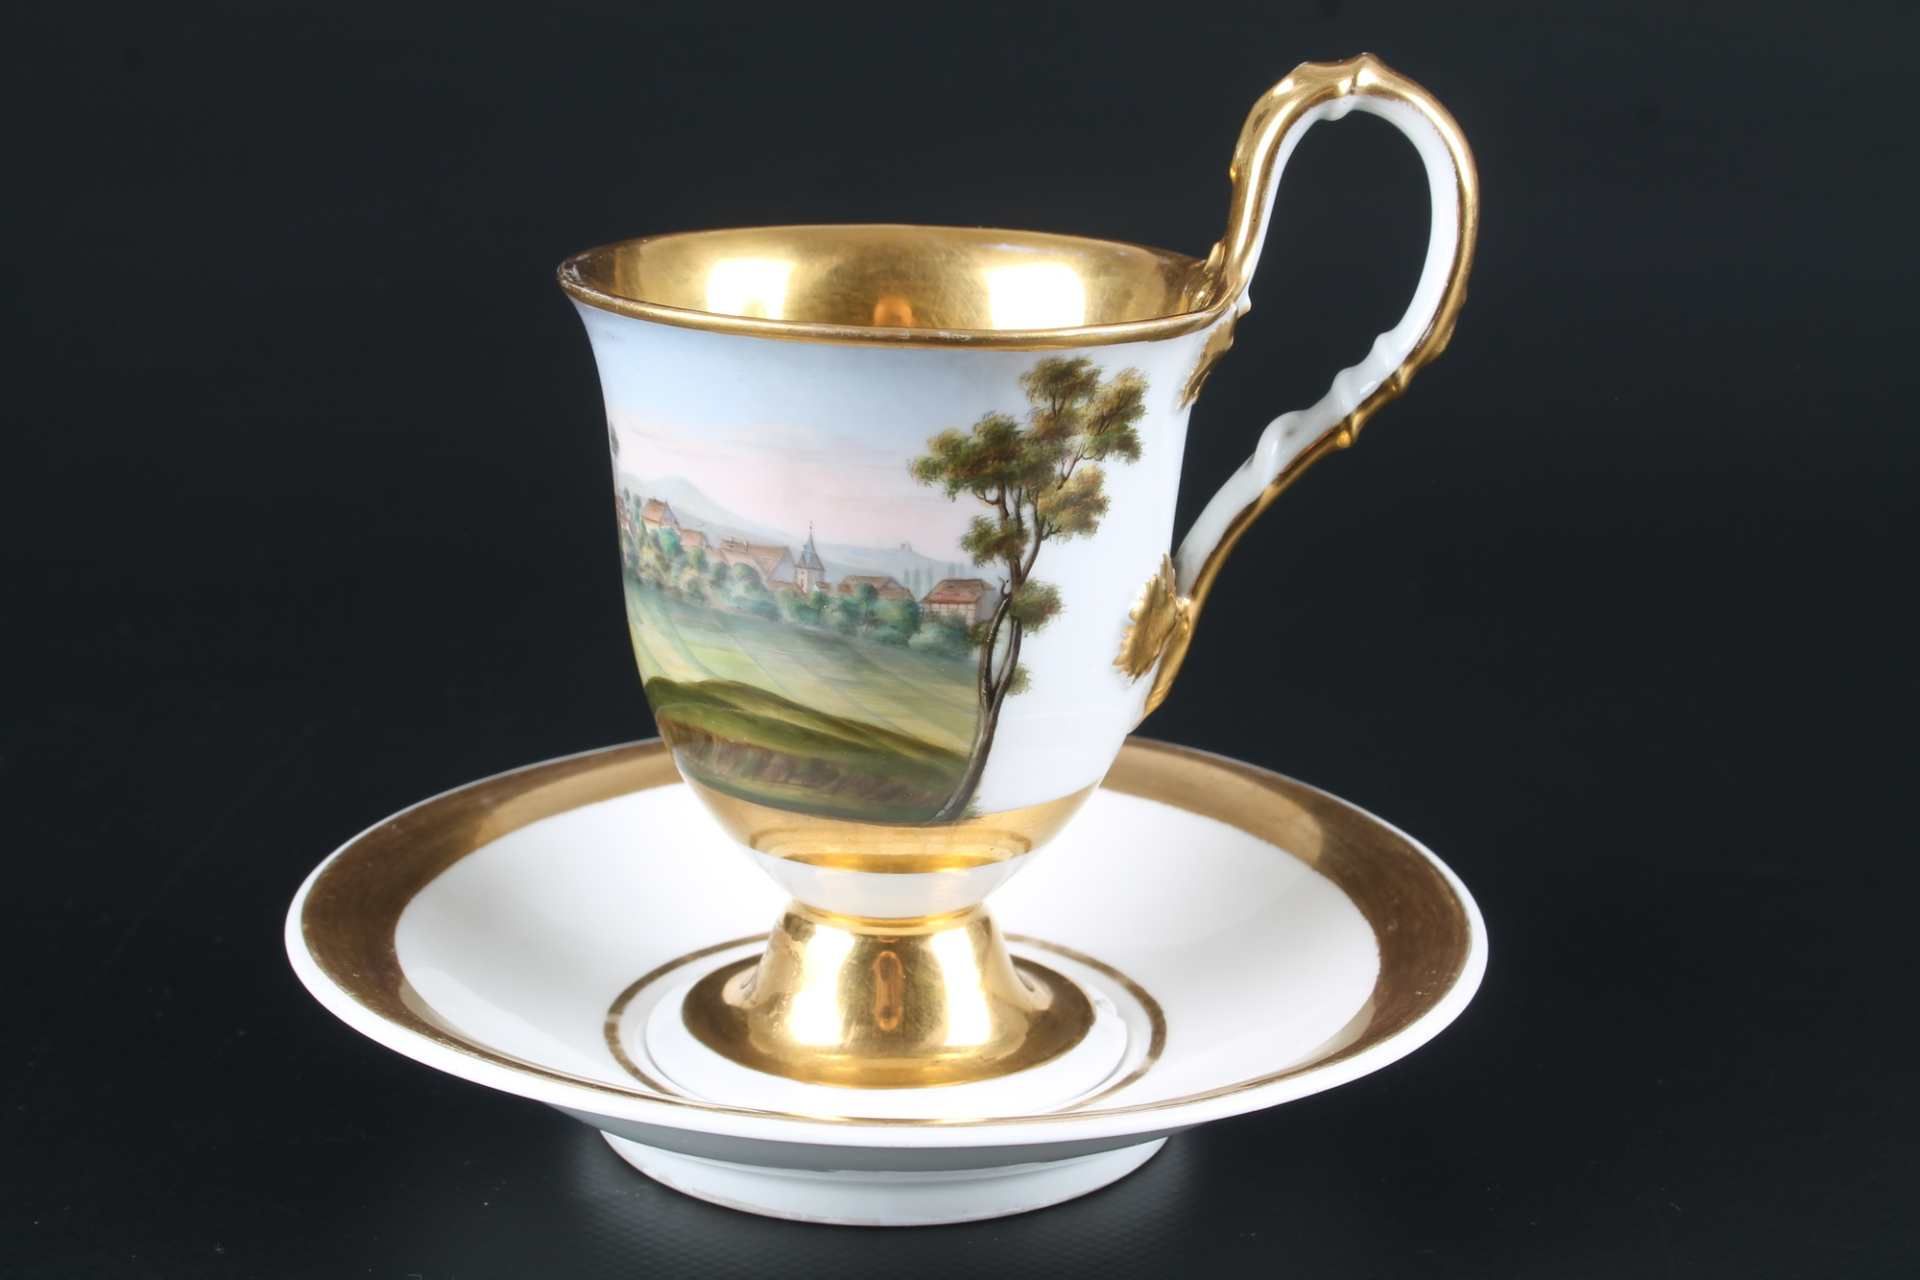 KPM Berlin Ansichtentasse, collection cup, - Image 2 of 9